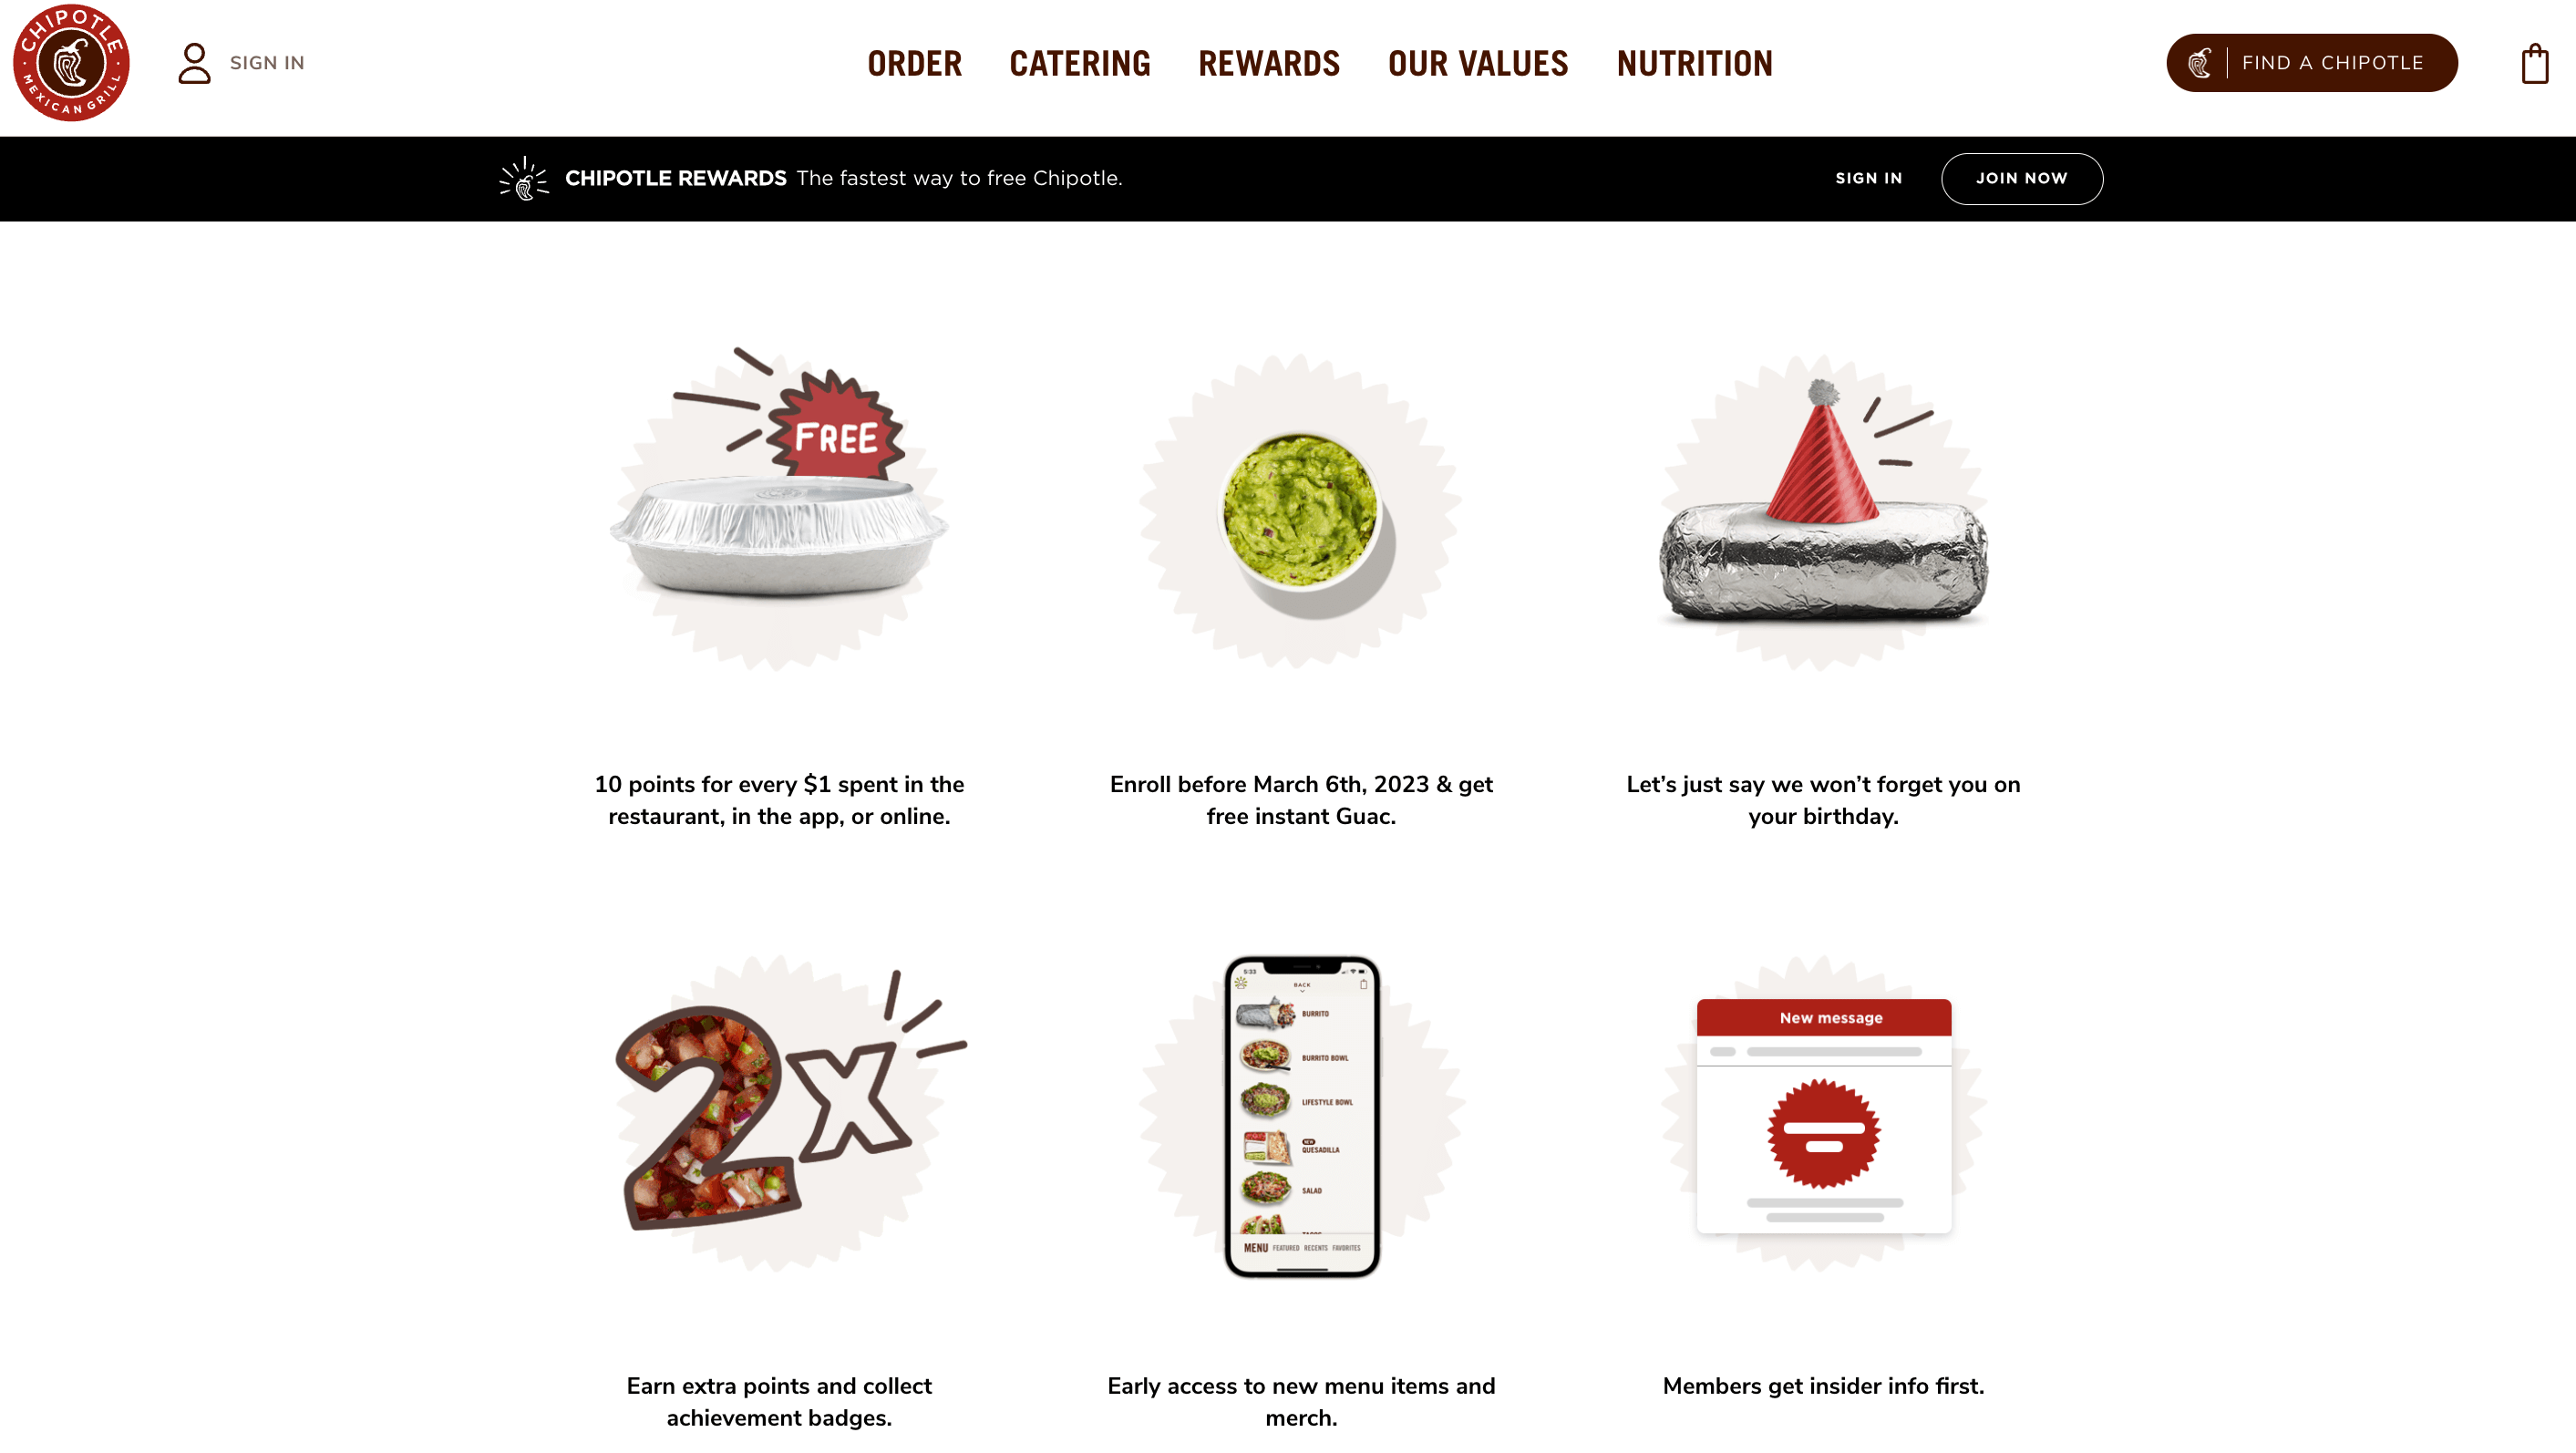 Examples Food and Beverage - chipotle how it works